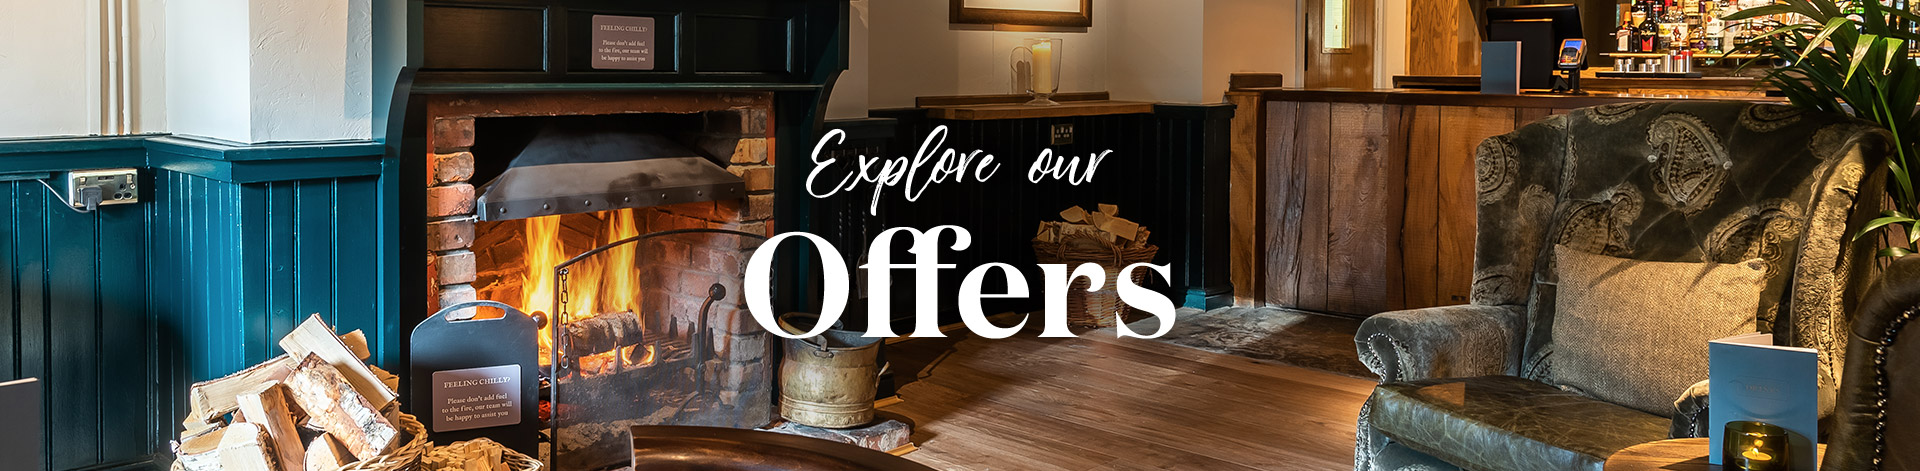 Our latest offers at The Swan, Heddon